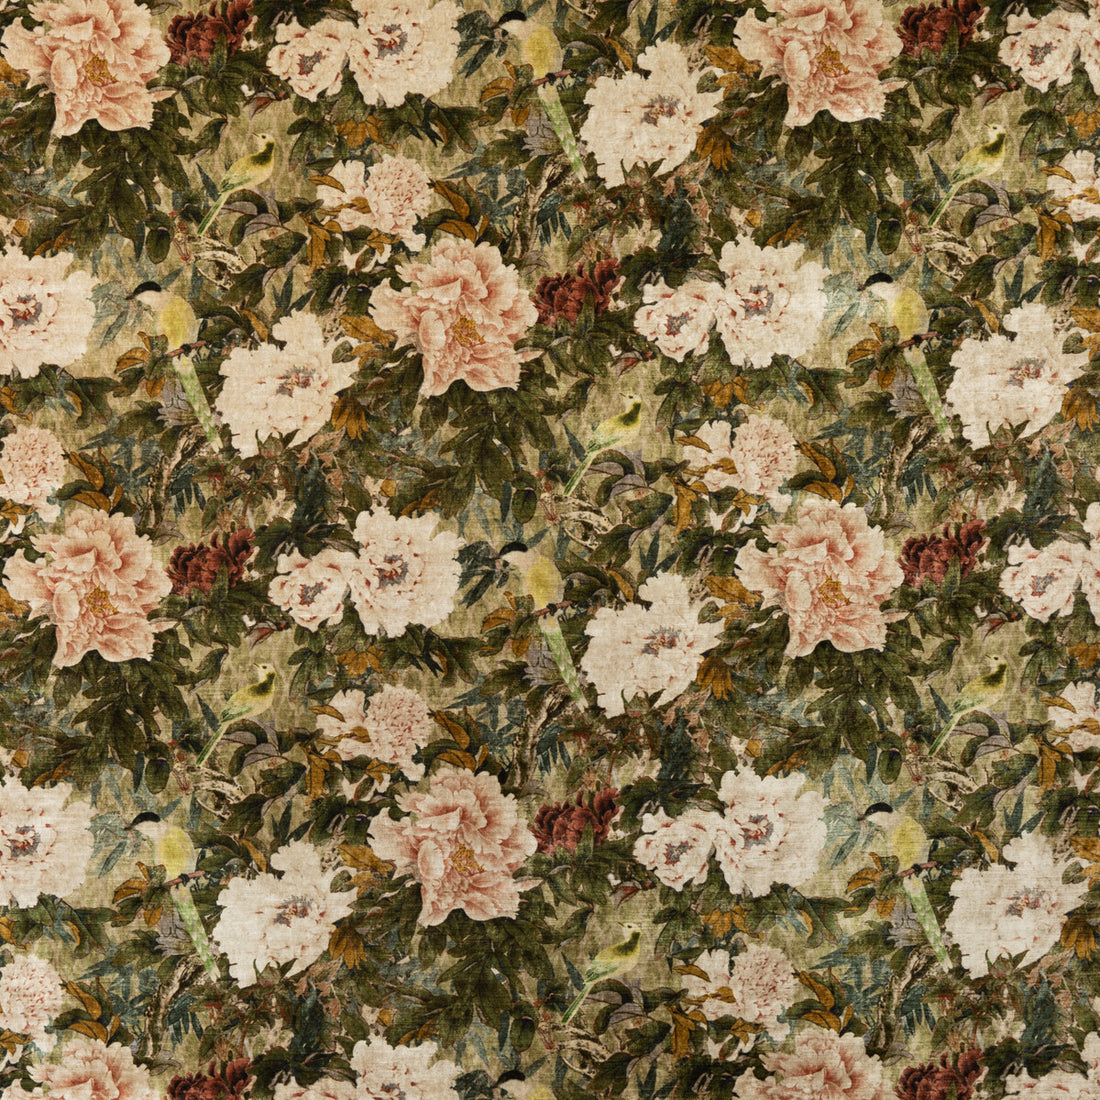 Oriental Garden fabric in mole color - pattern BP10817.1.0 - by G P &amp; J Baker in the Signature Velvets collection